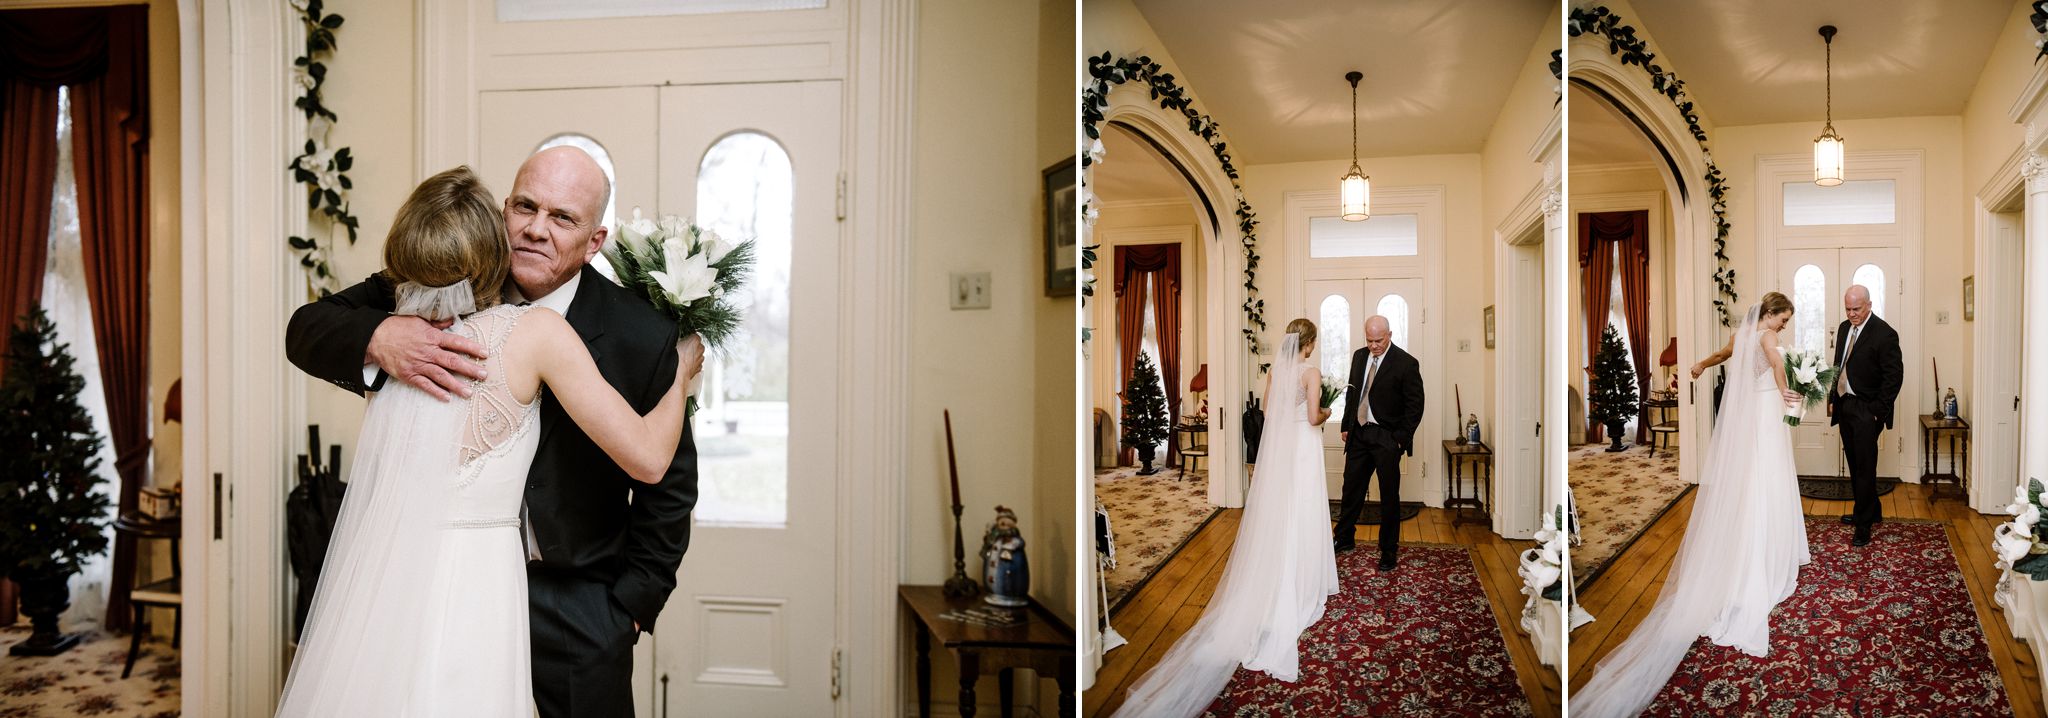 The bride having an emotional first look with her dad in the front foyer of the Larimore House, just before he walks her down the aisle. 